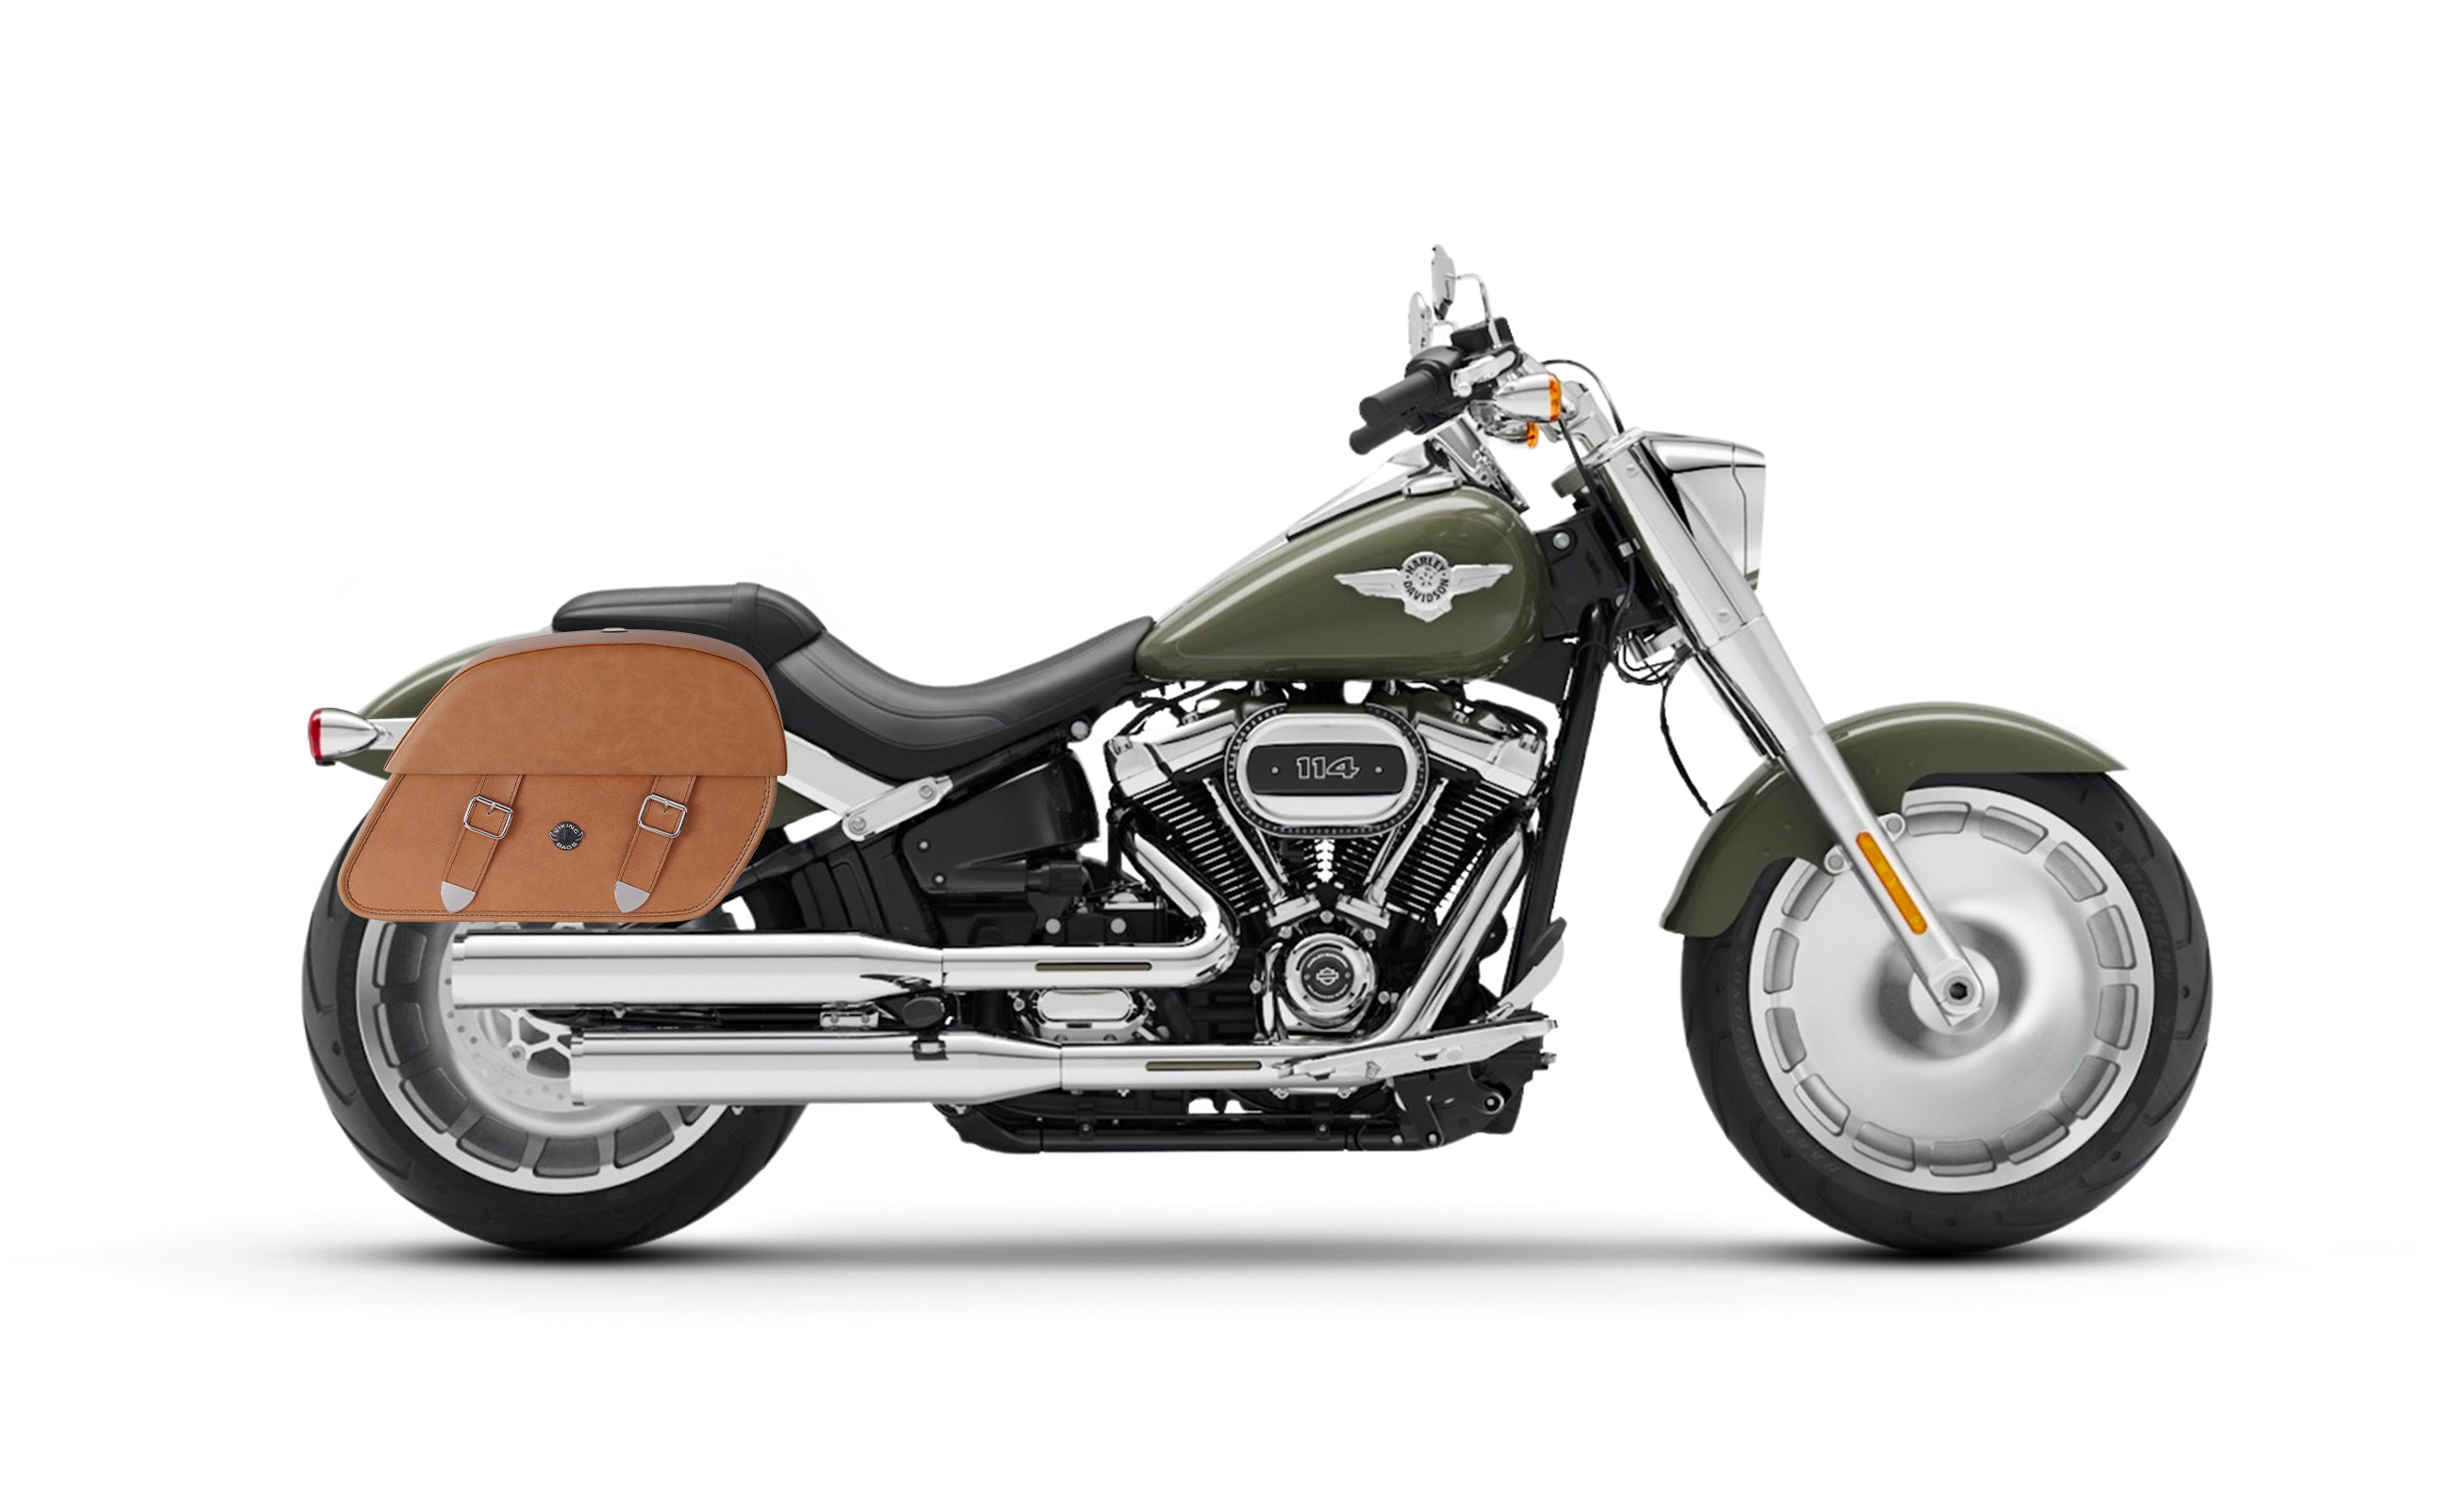 33L - Baelor Brown Large Leather Saddlebags For Harley Softail Fat Boy FLFB/S @expand